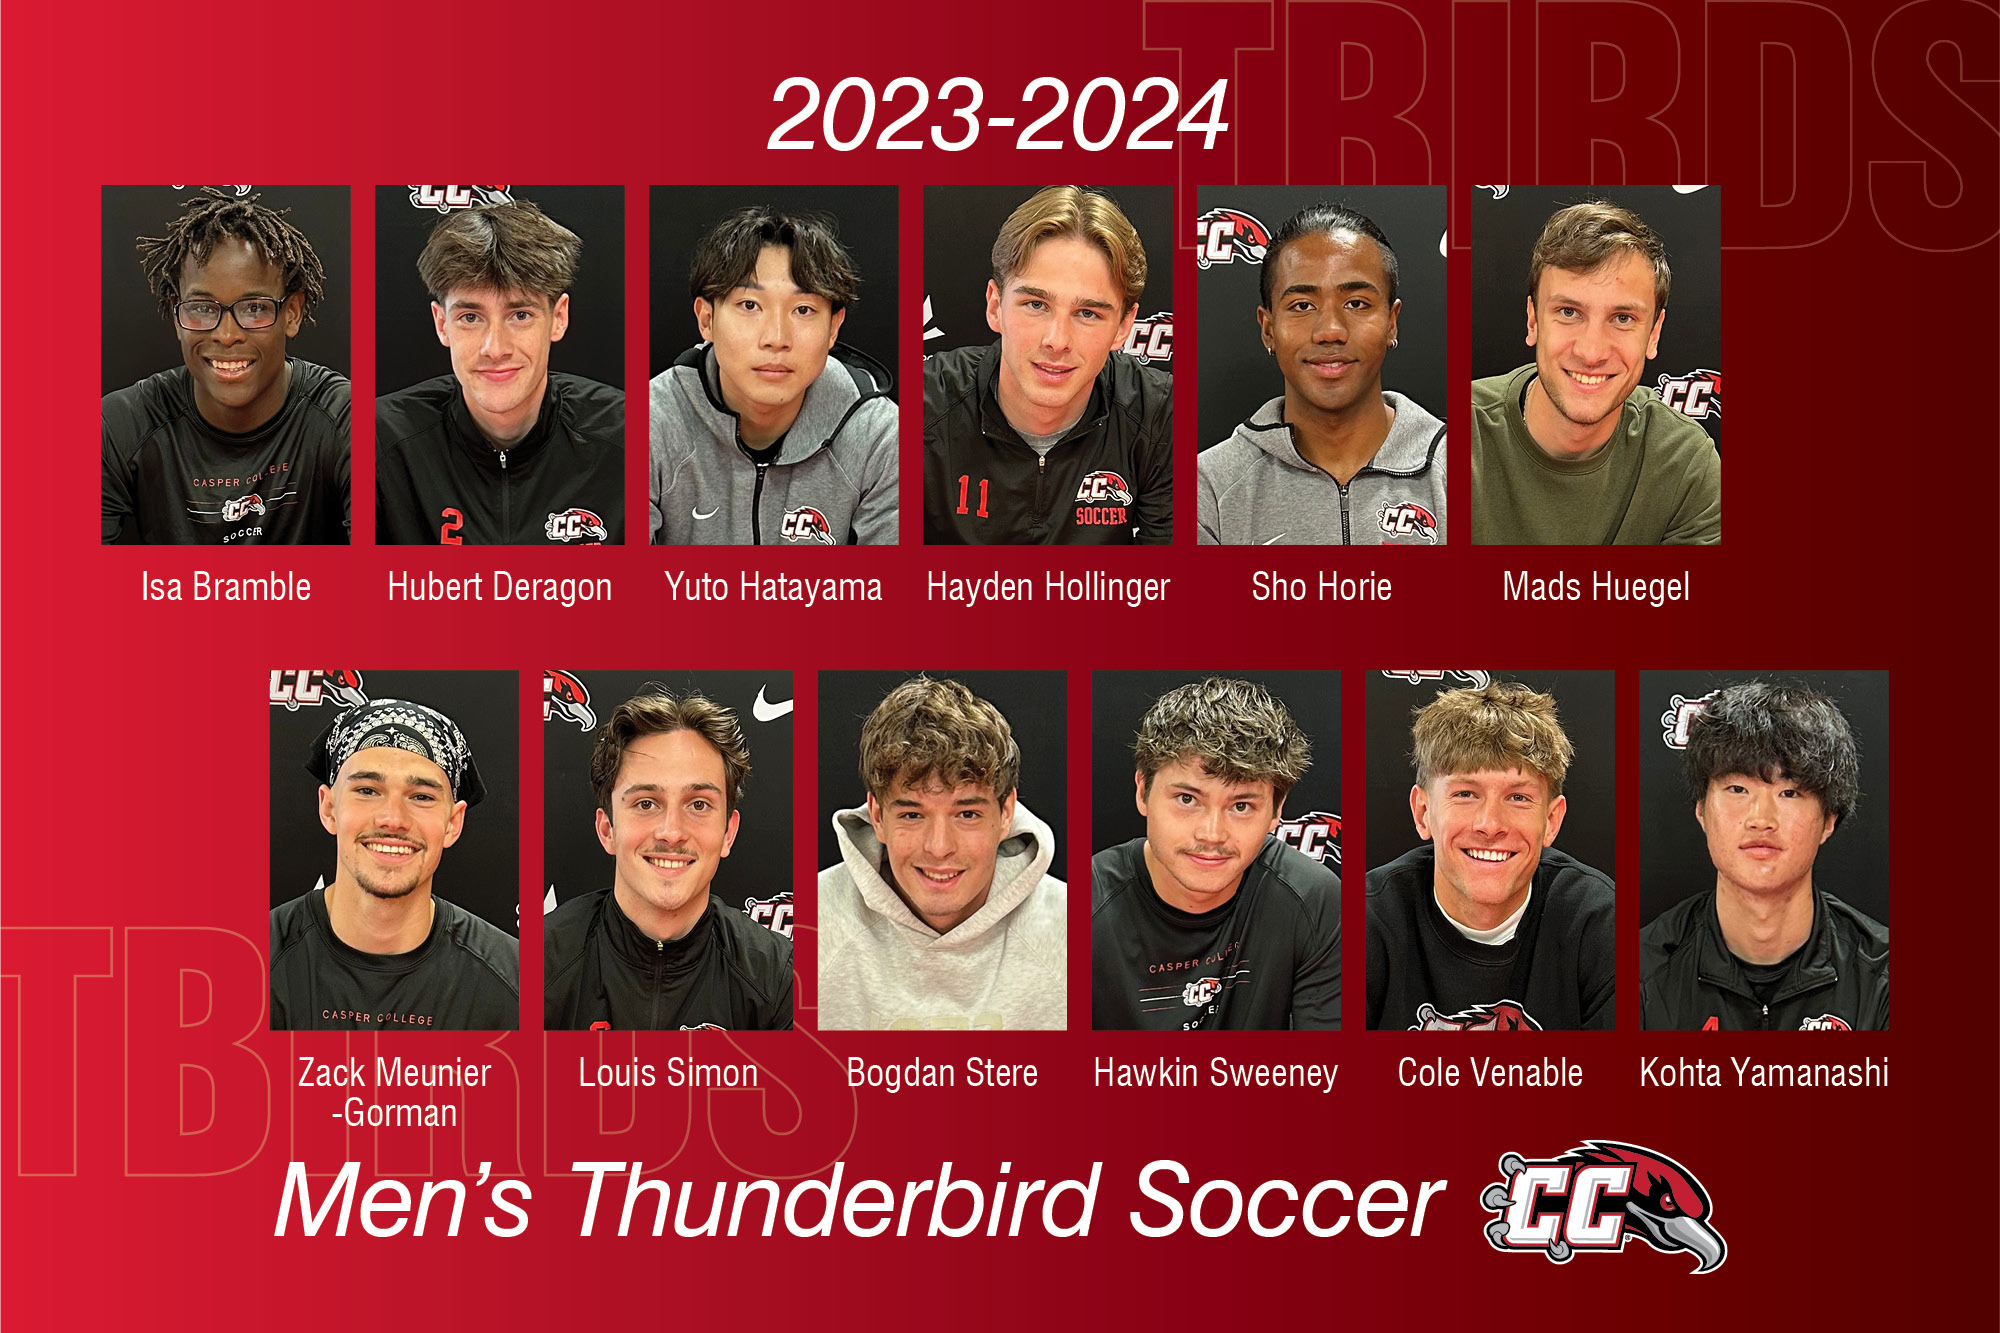 Image of 12 soccer players signing to play at the university level for the press release.